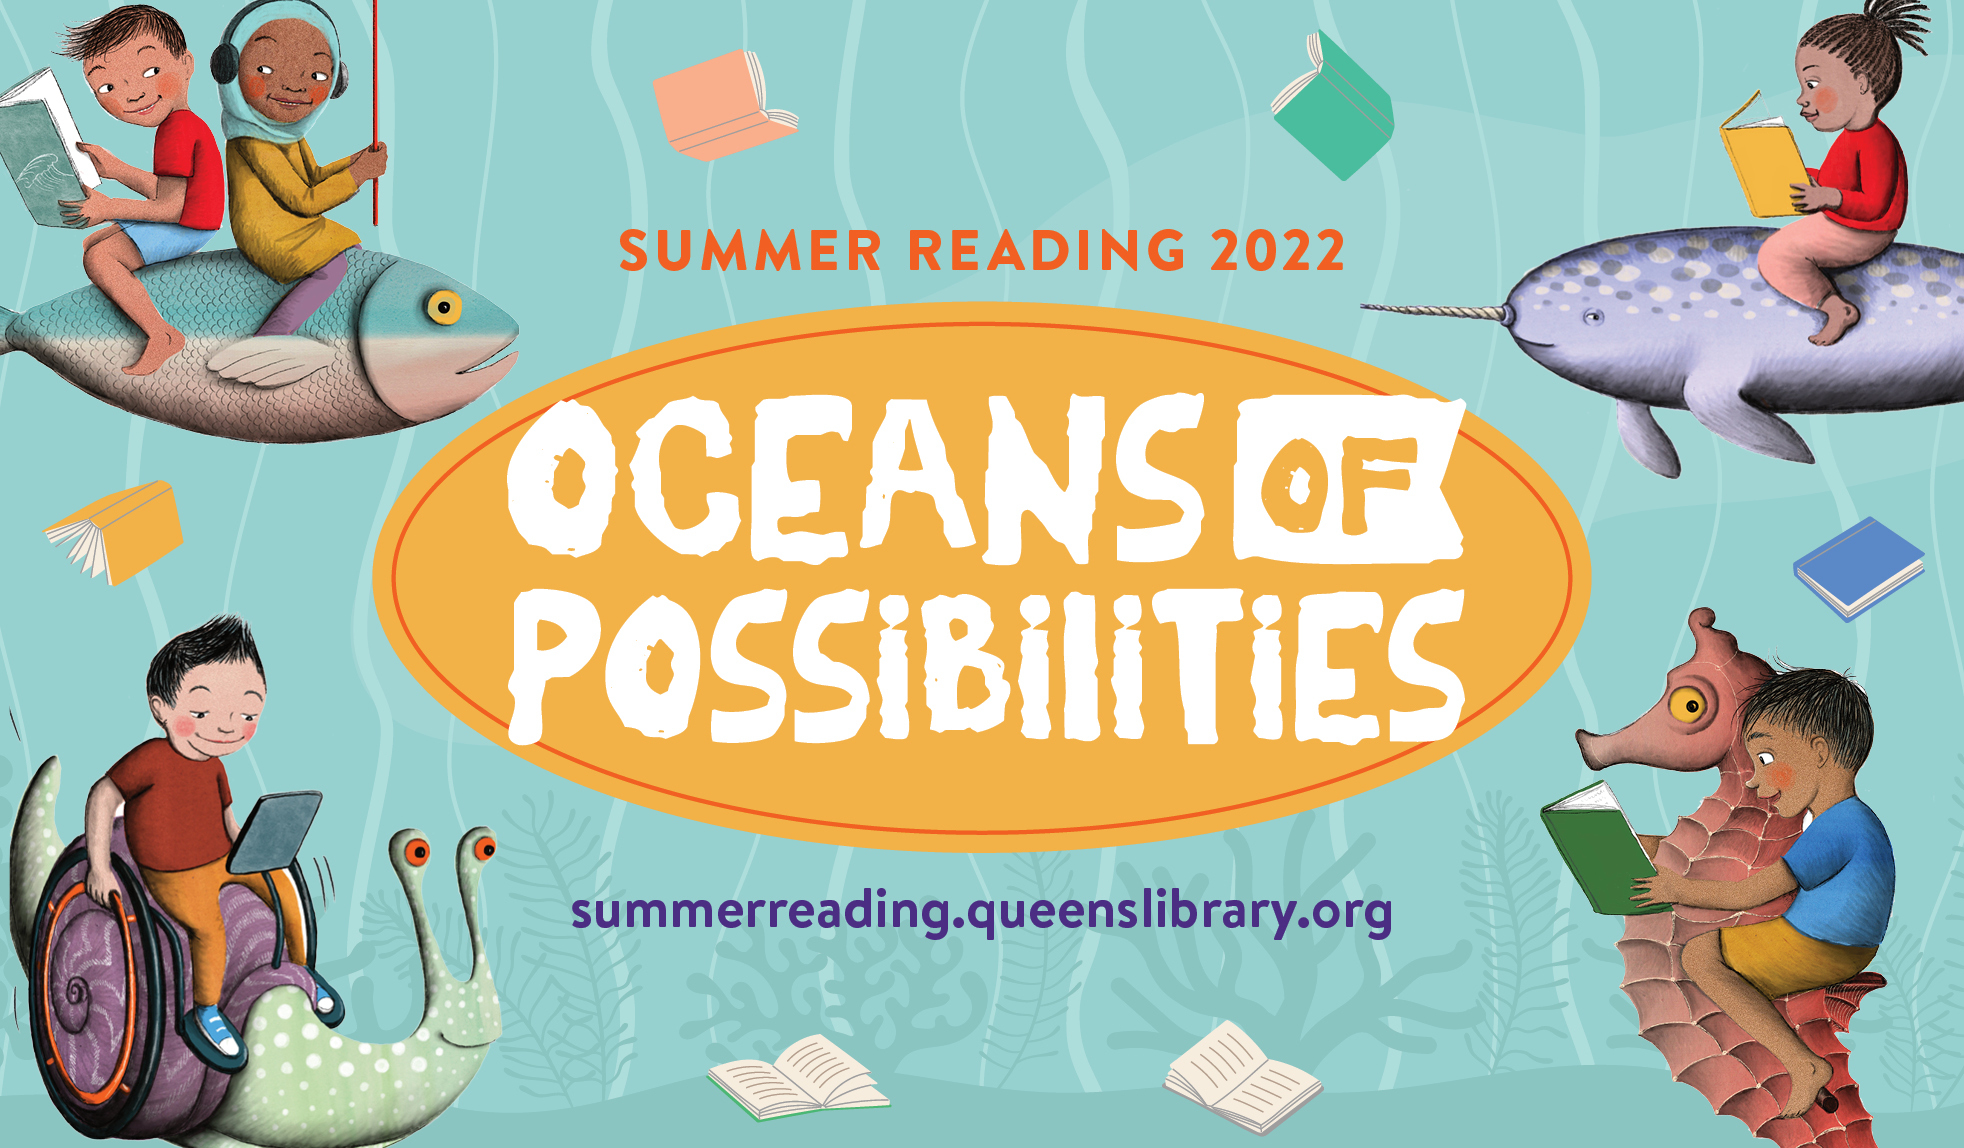 Our programs, booklists, and resources will keep you and your kids engaged all summer long.